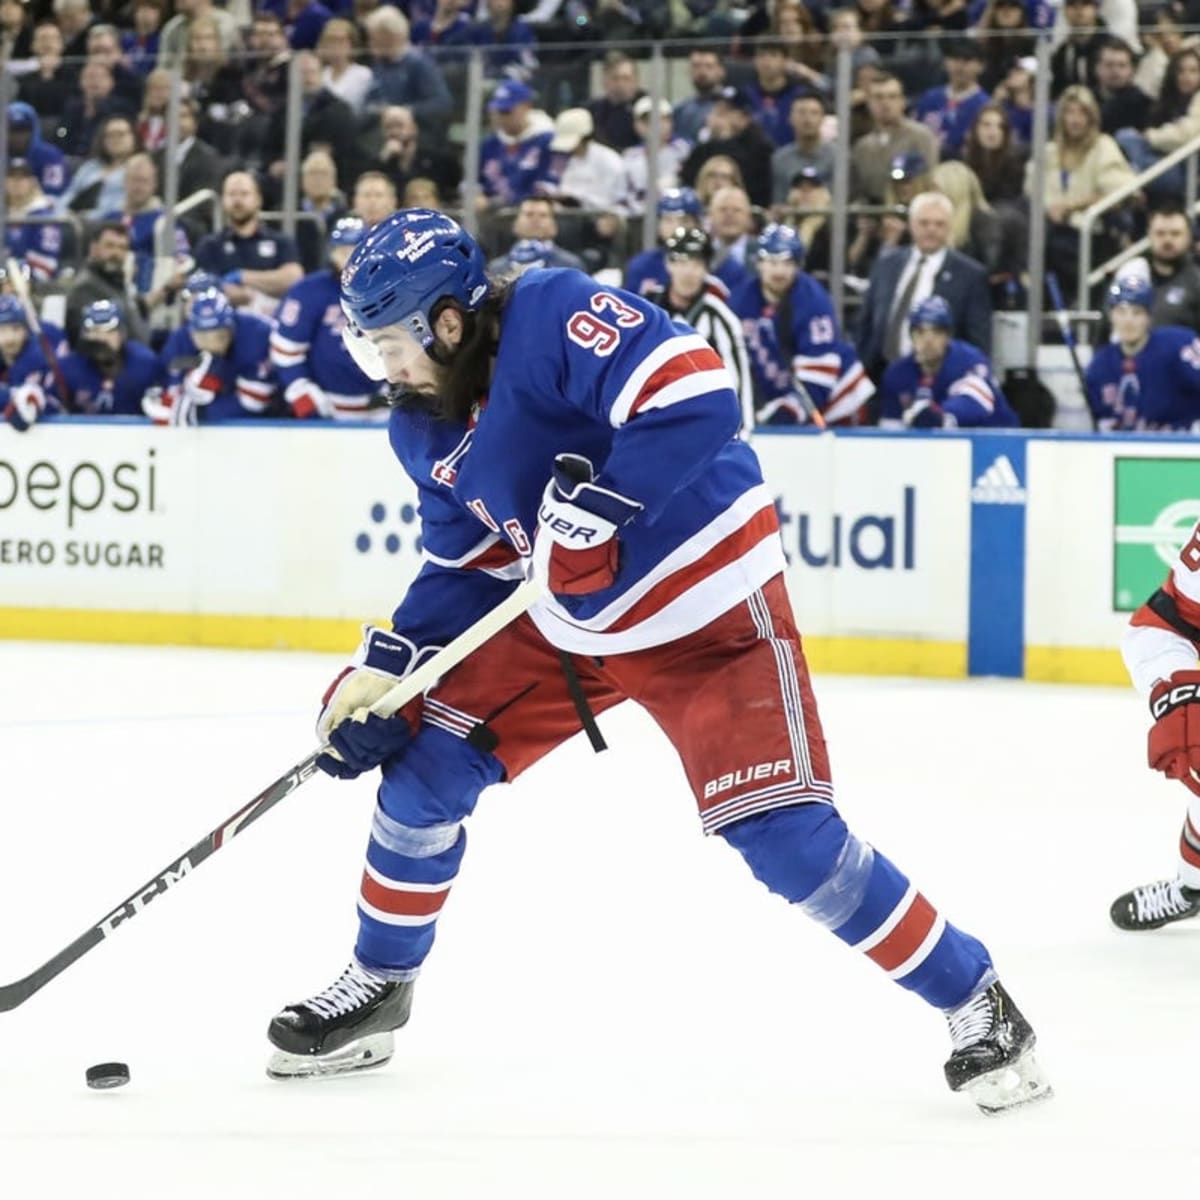 New York Rangers vs. New Jersey Devils: How to watch, stream NHL